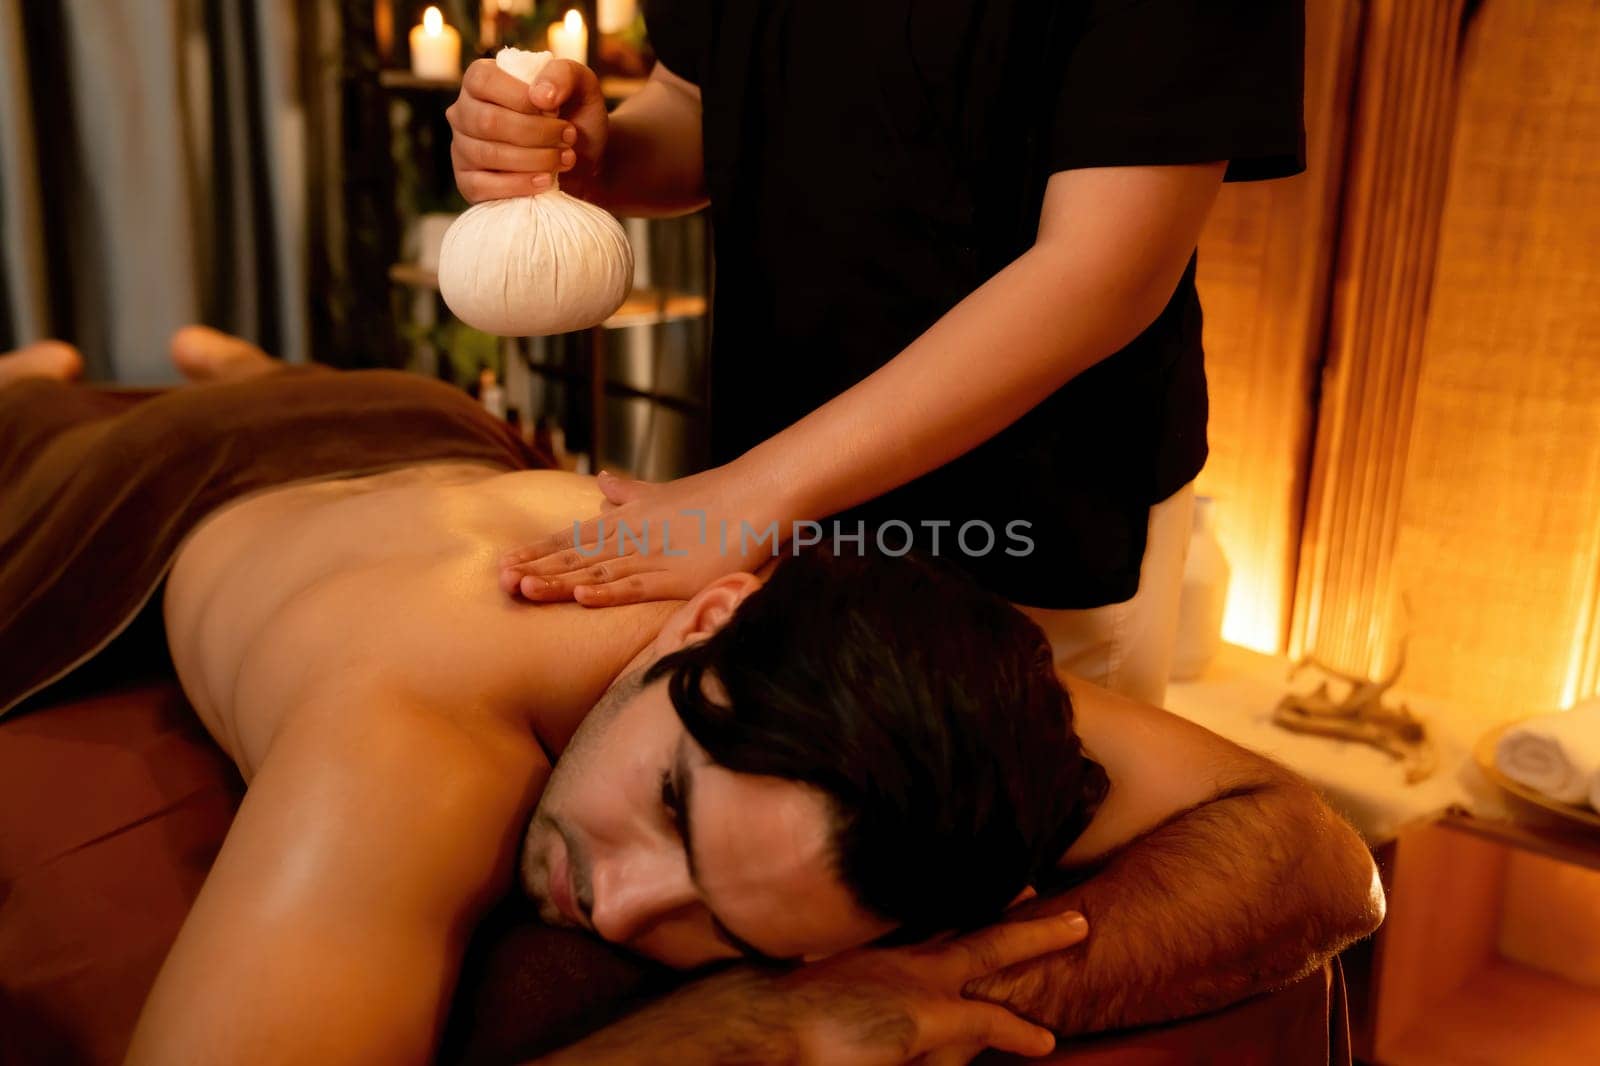 Caucasian man customer enjoying relaxing anti-stress spa massage and pampering with beauty skin recreation leisure in warm candle lighting ambient salon spa at luxury resort or hotel. Quiescent